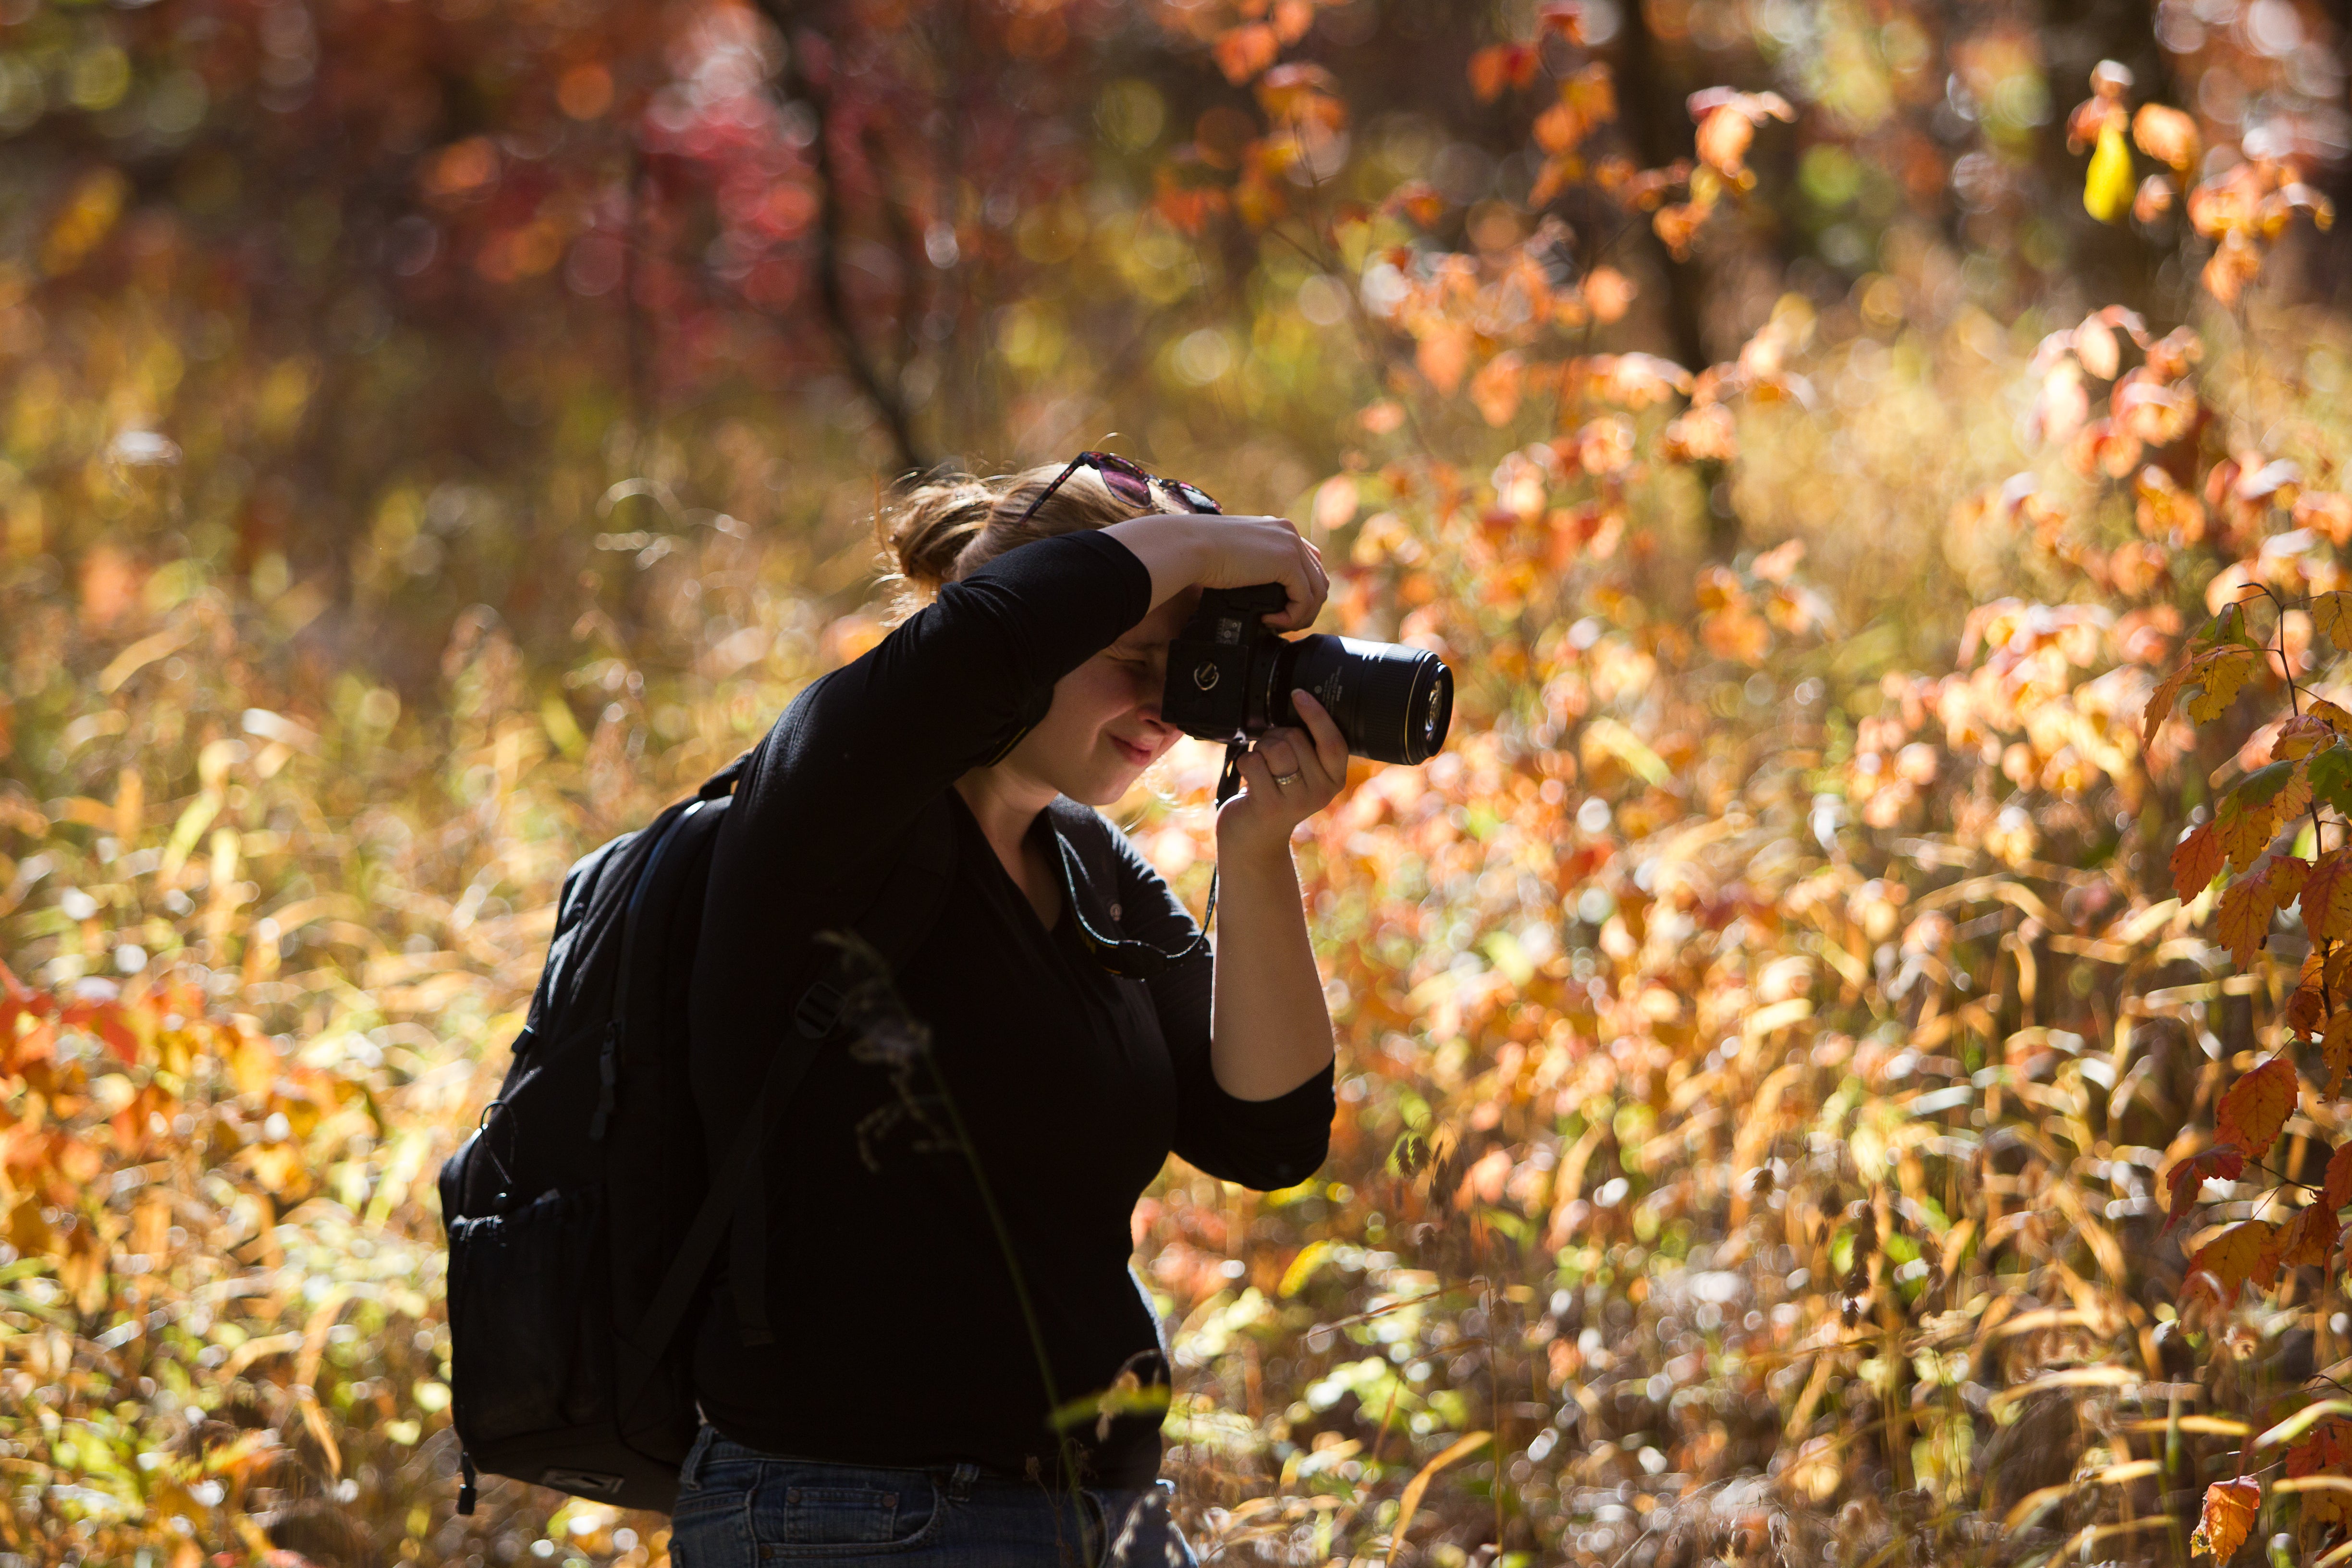 A woman takes a photograph in a field in autumn.